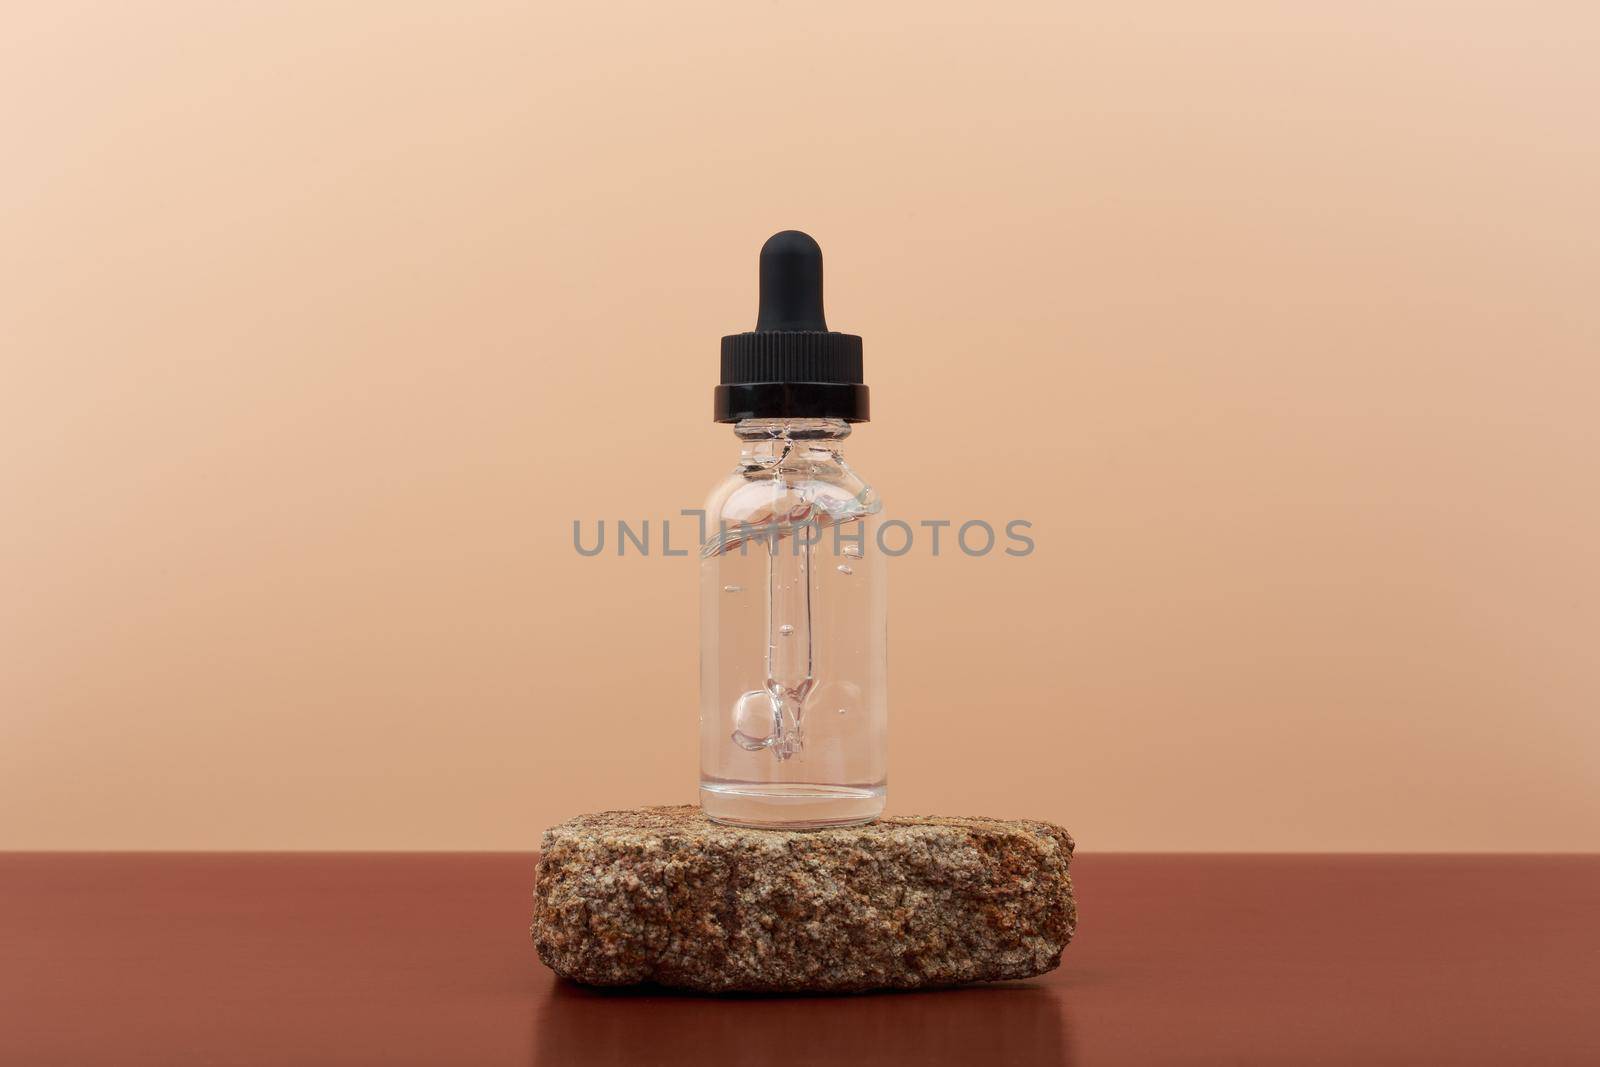 Skin serum in transparent bottle with black cap on a stone and brown table against beige background with copy space. Concept of skin treatment and beauty products to cure acne